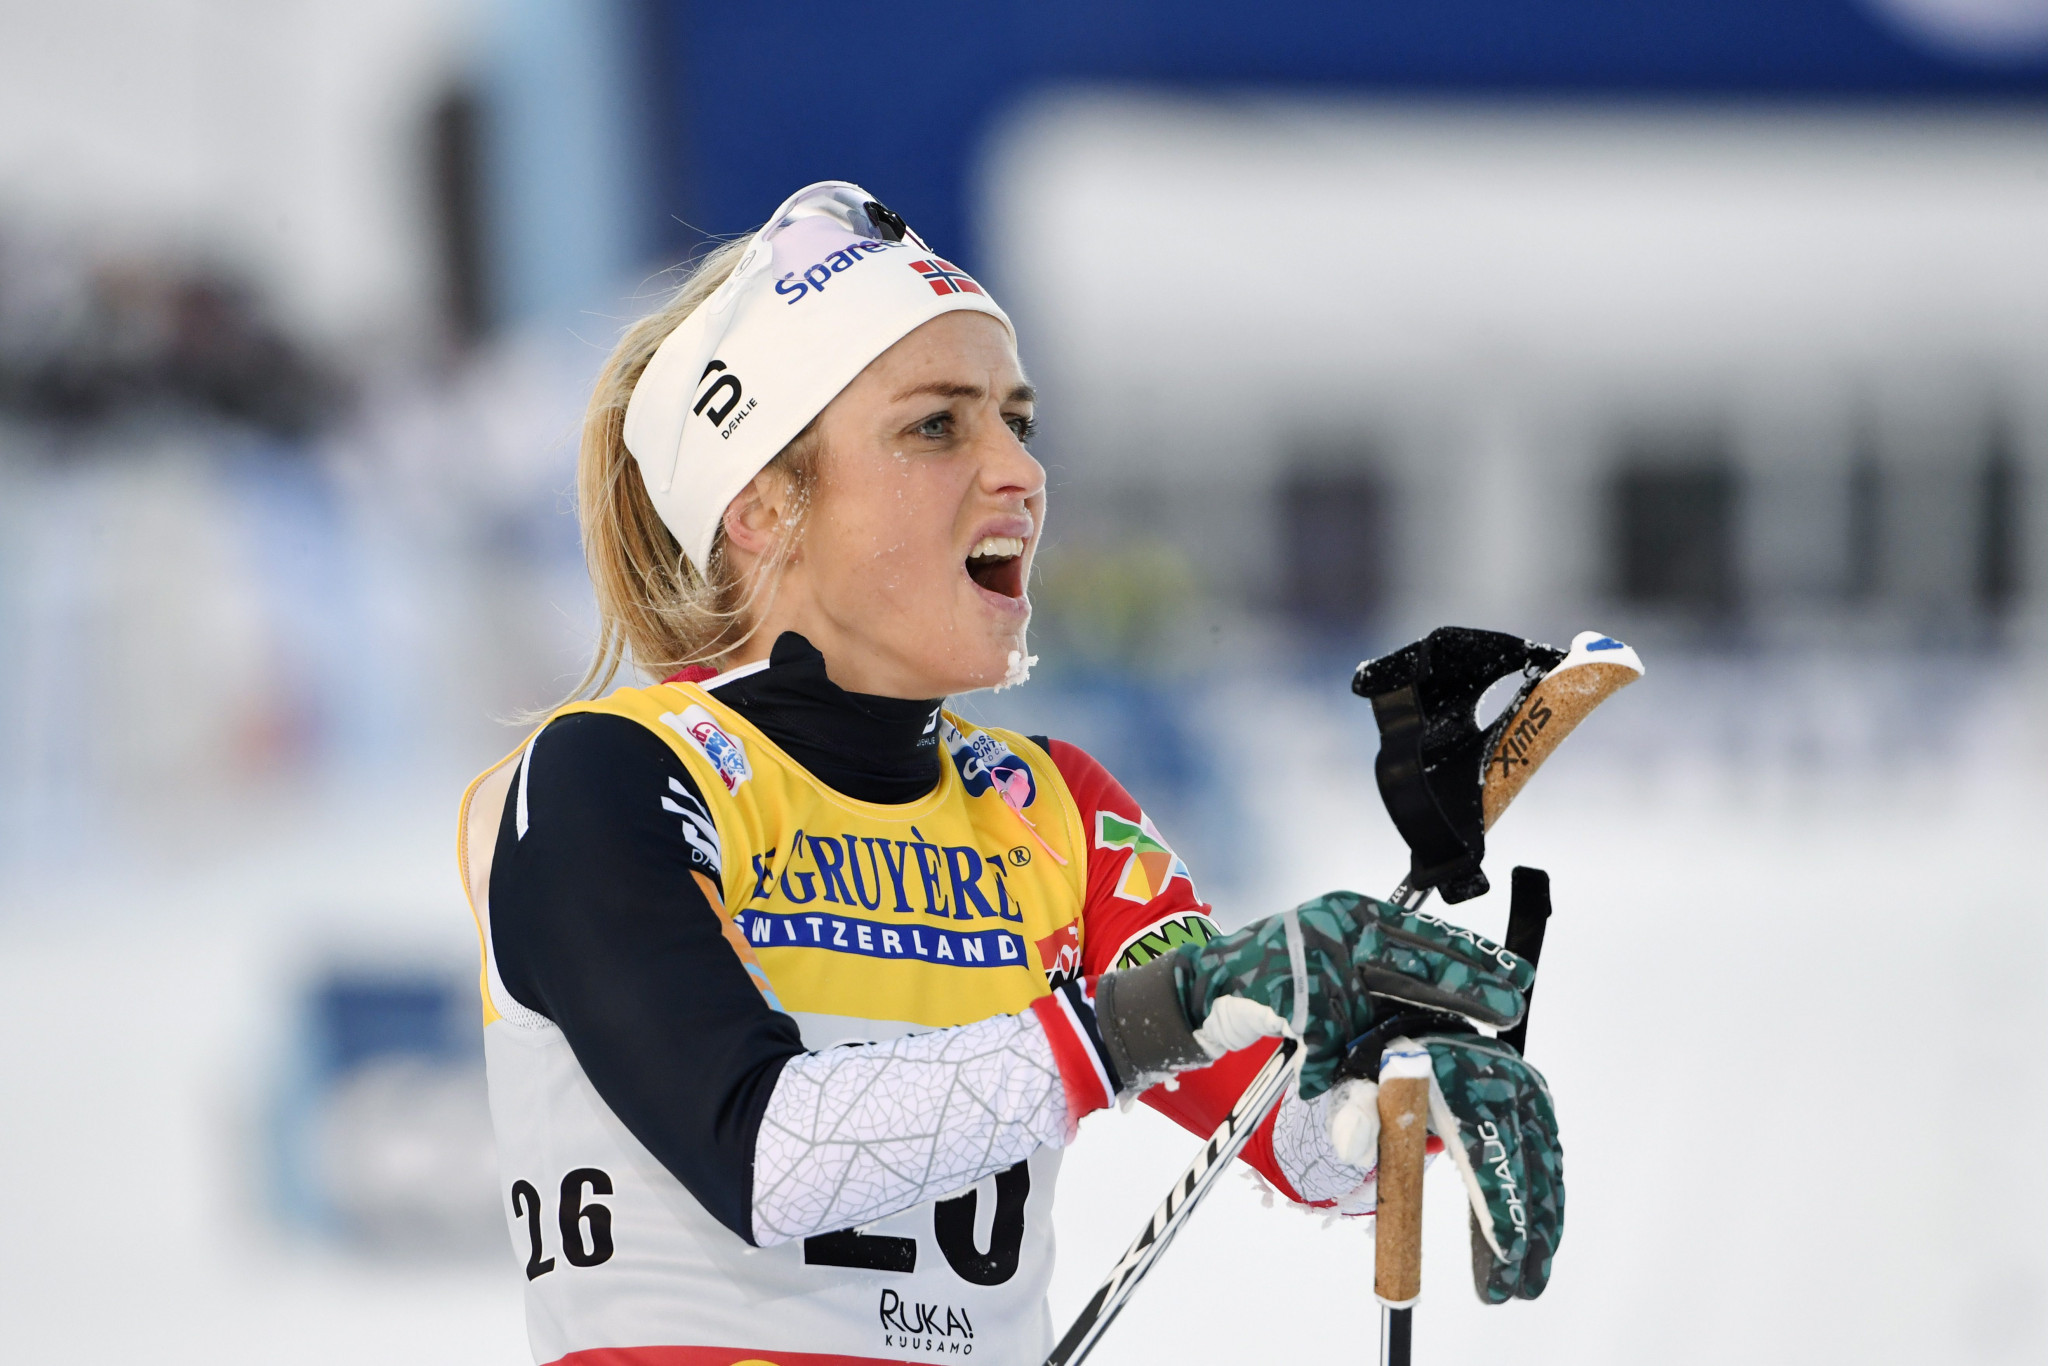  Norway’s multiple world cross-country skiing champion Johaug wins first race  back after doping ban